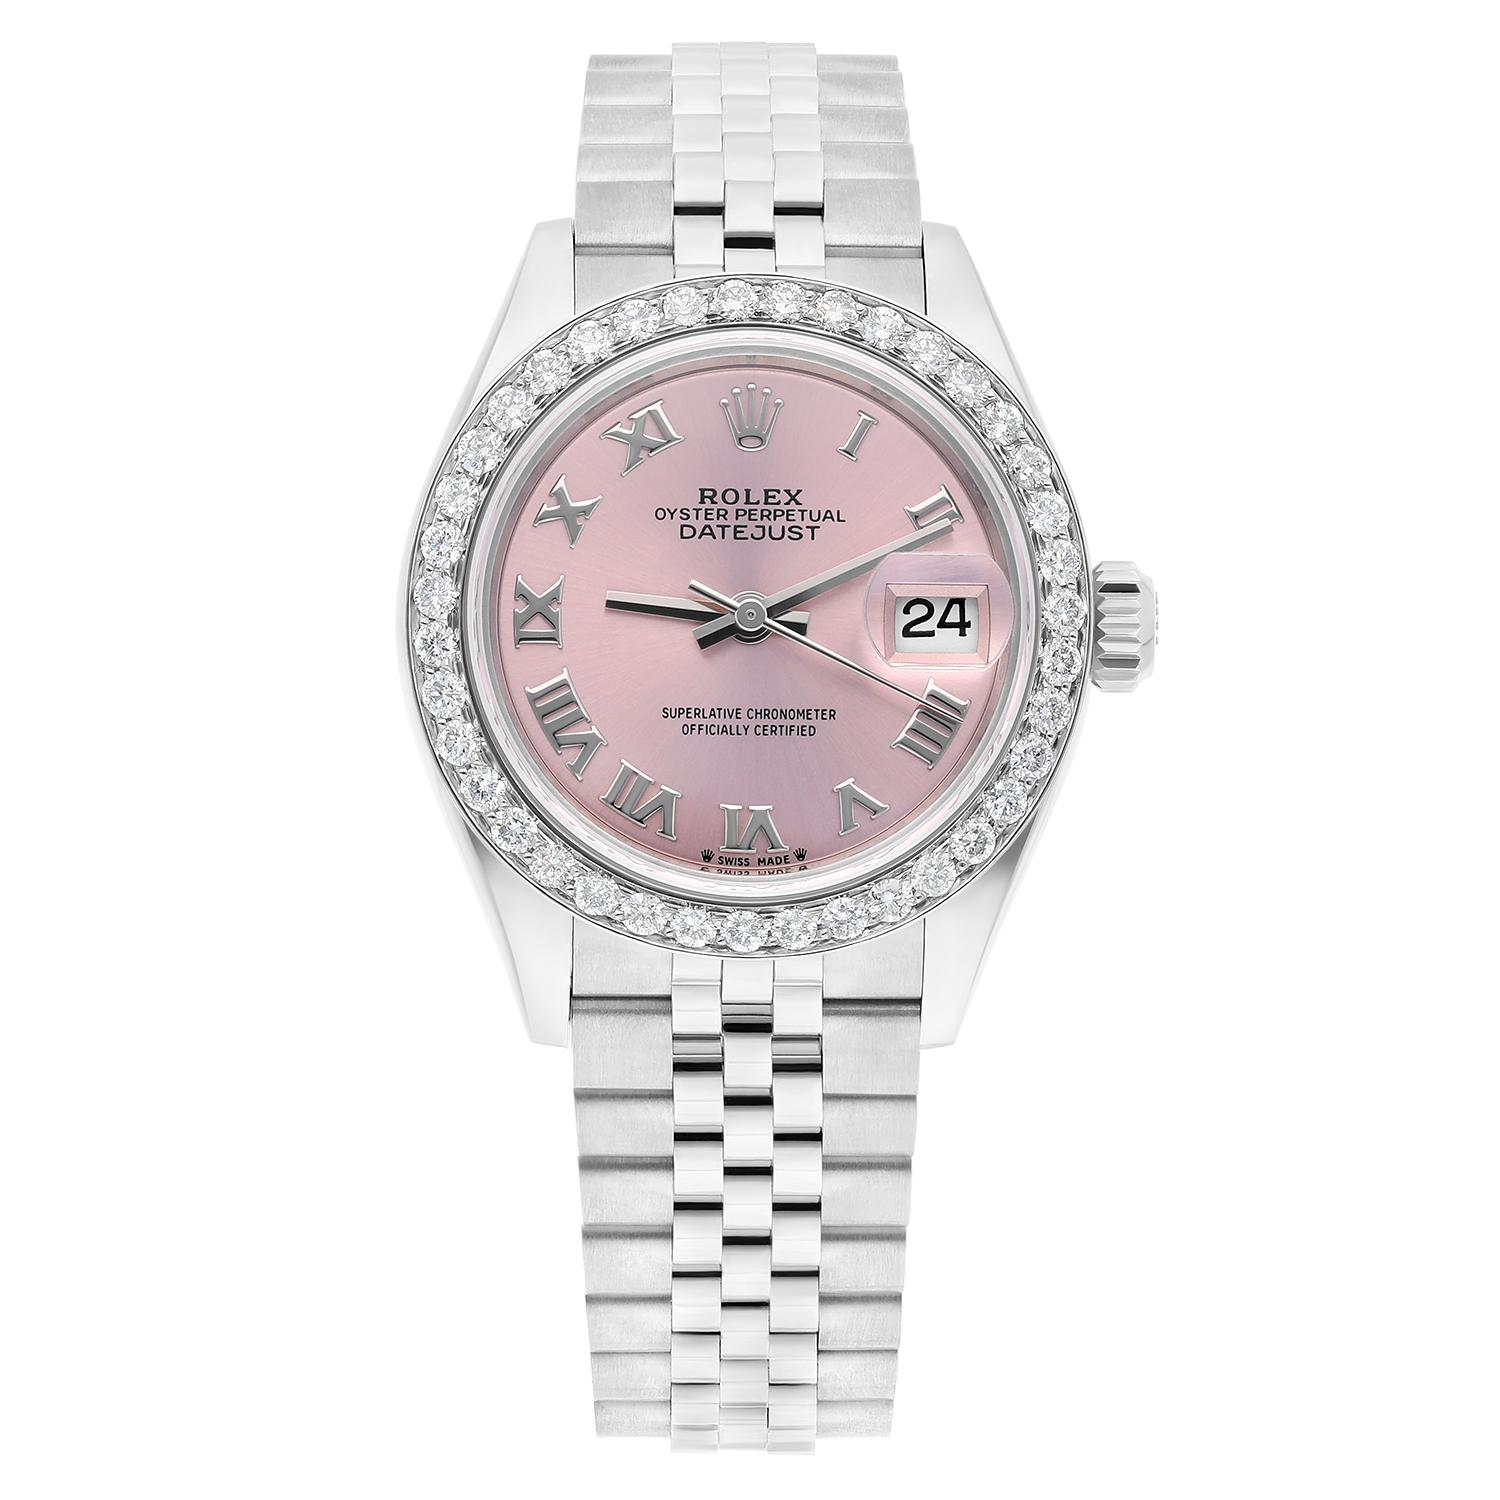 This stunning  Rolex Datejust 28 wristwatch is a true masterpiece of Swiss craftsmanship and luxury design. With a sleek, stainless steel case and jubilee bracelet, this timepiece boasts a timeless and versatile style that can be dressed up or down